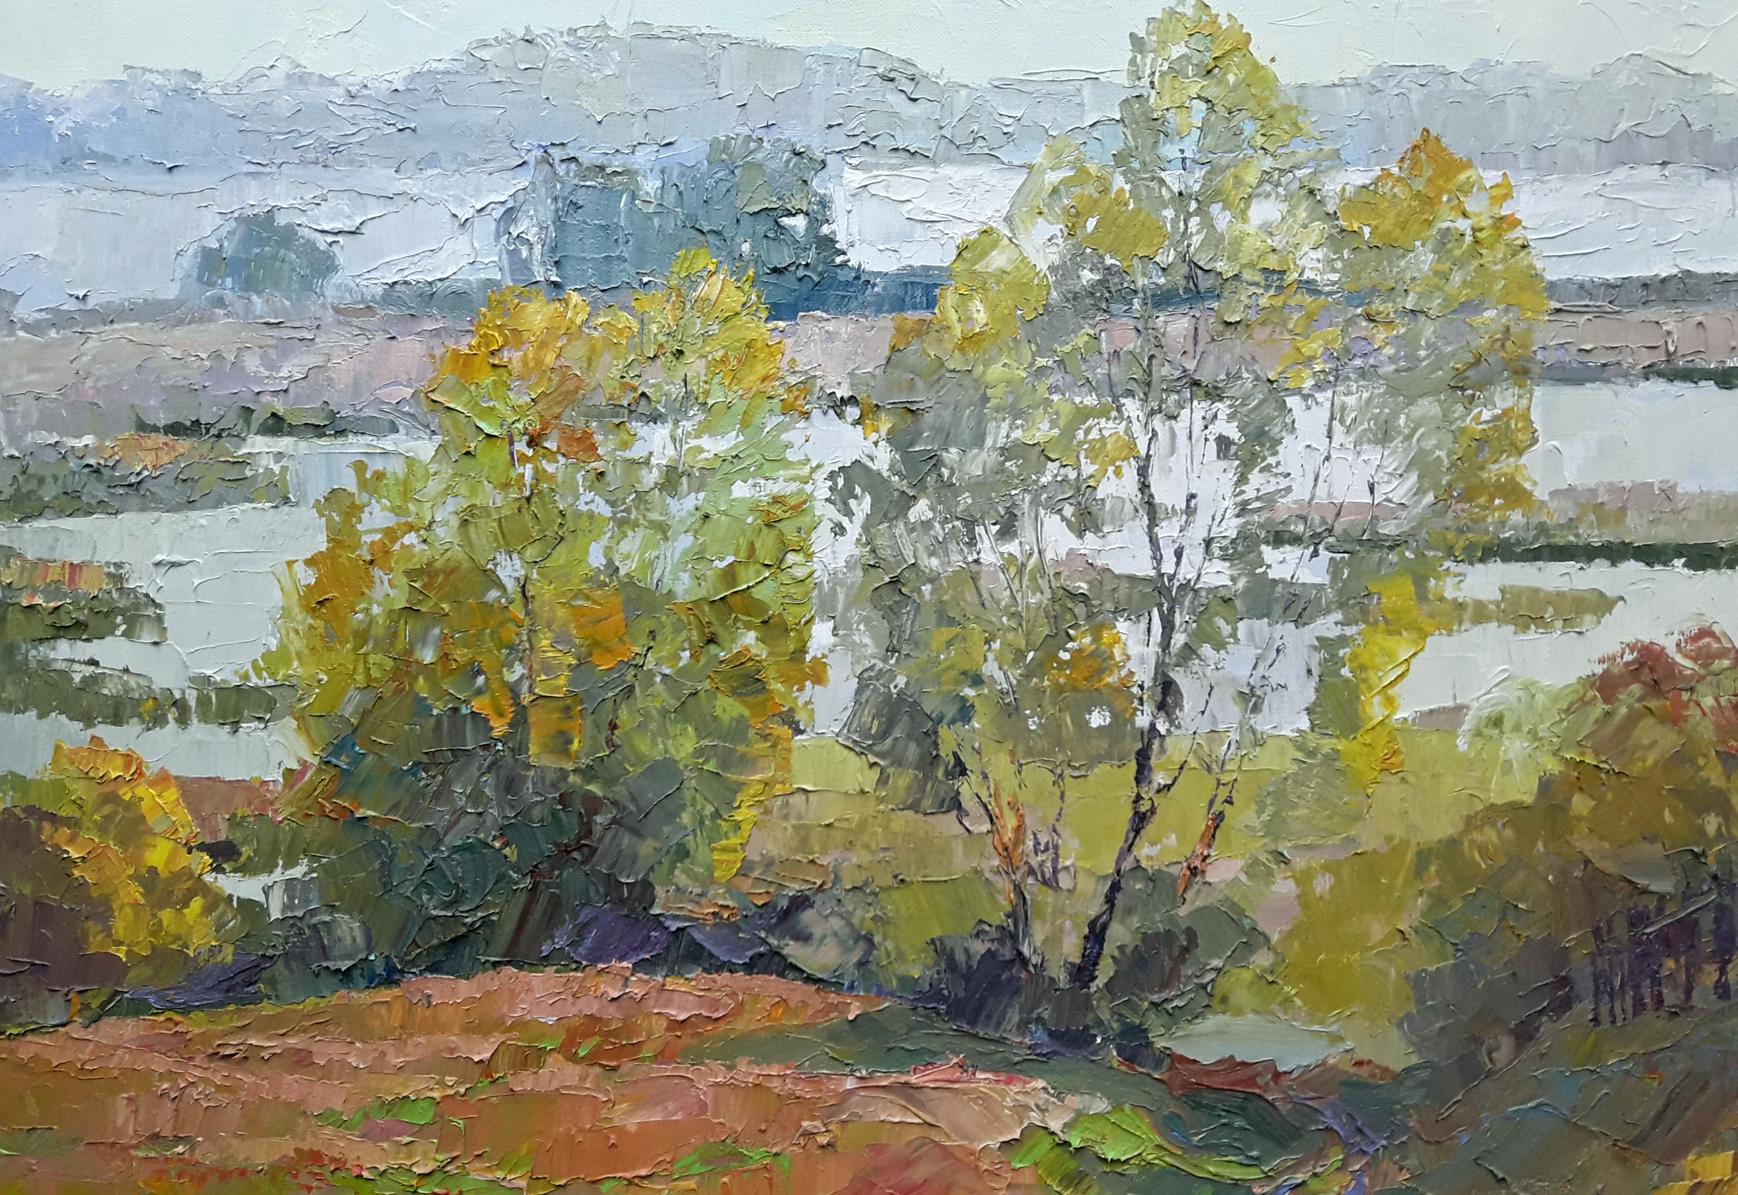 An oil painting titled "Open Spaces" by Boris Petrovich Serdyuk